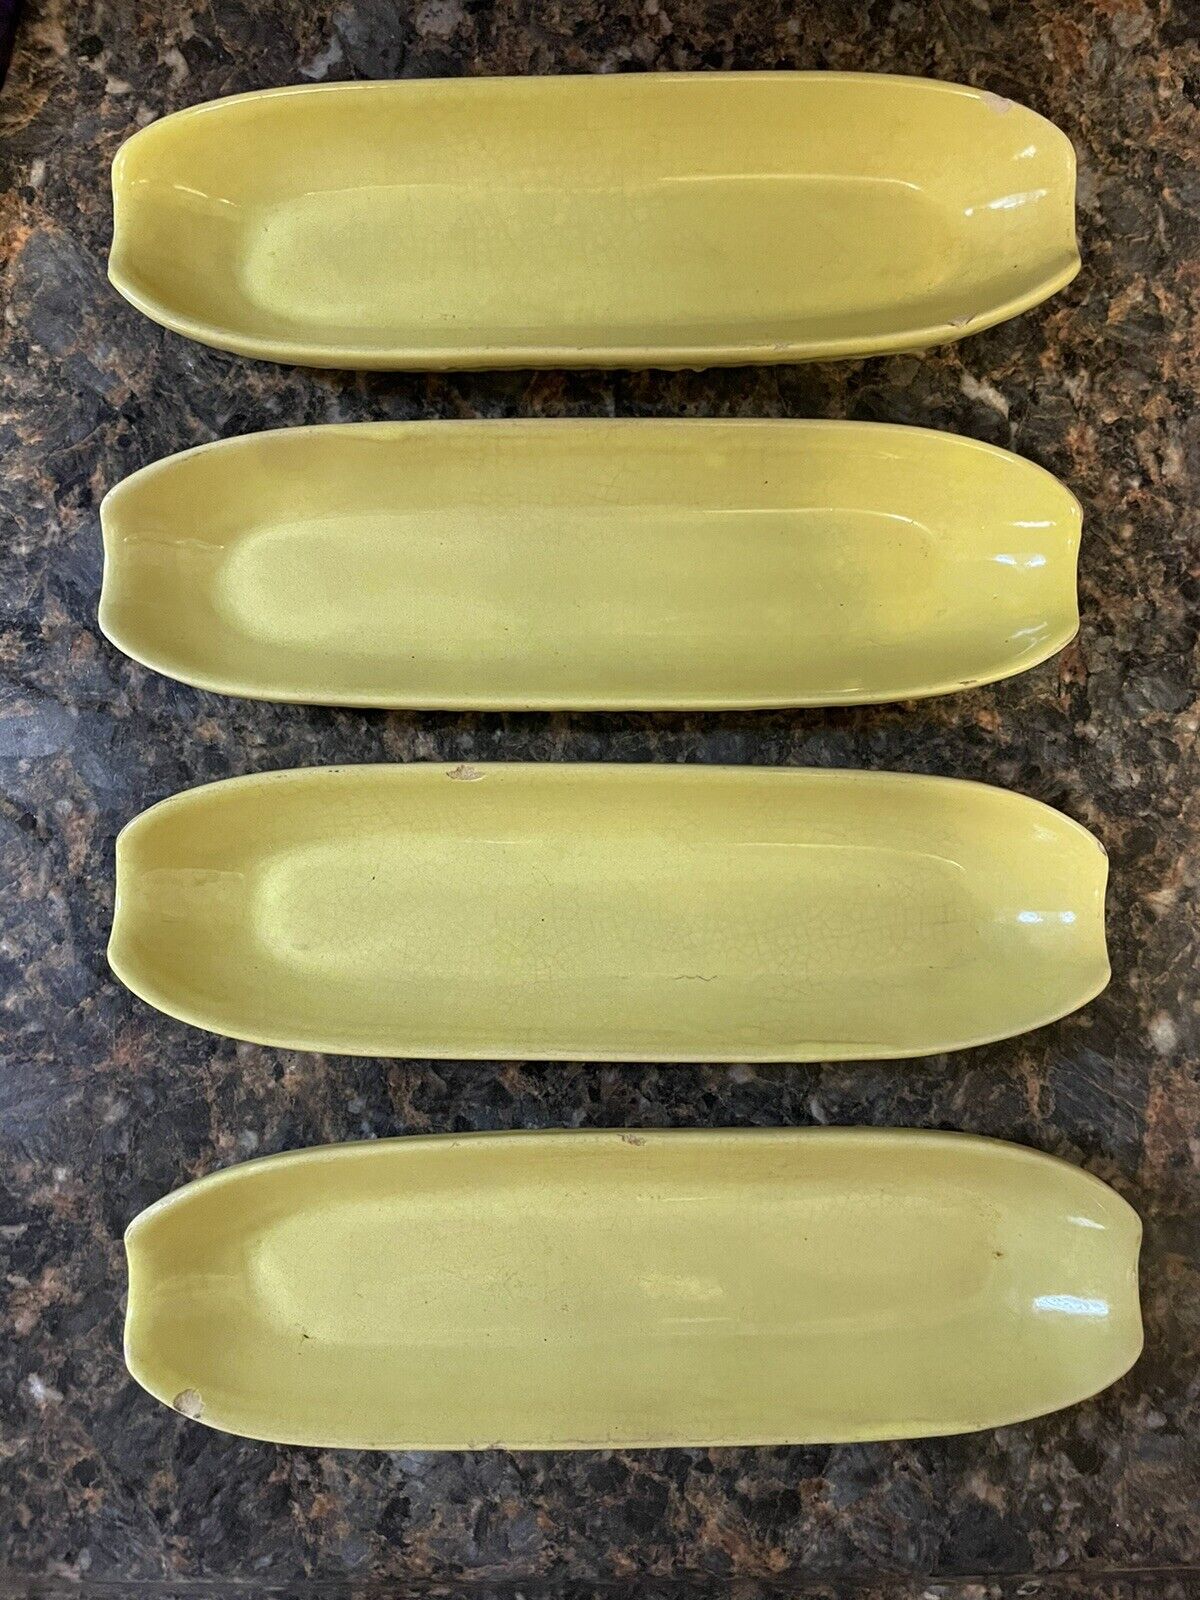 Corn On the Cob Heavy Glass Cub Dishes Set of 4 